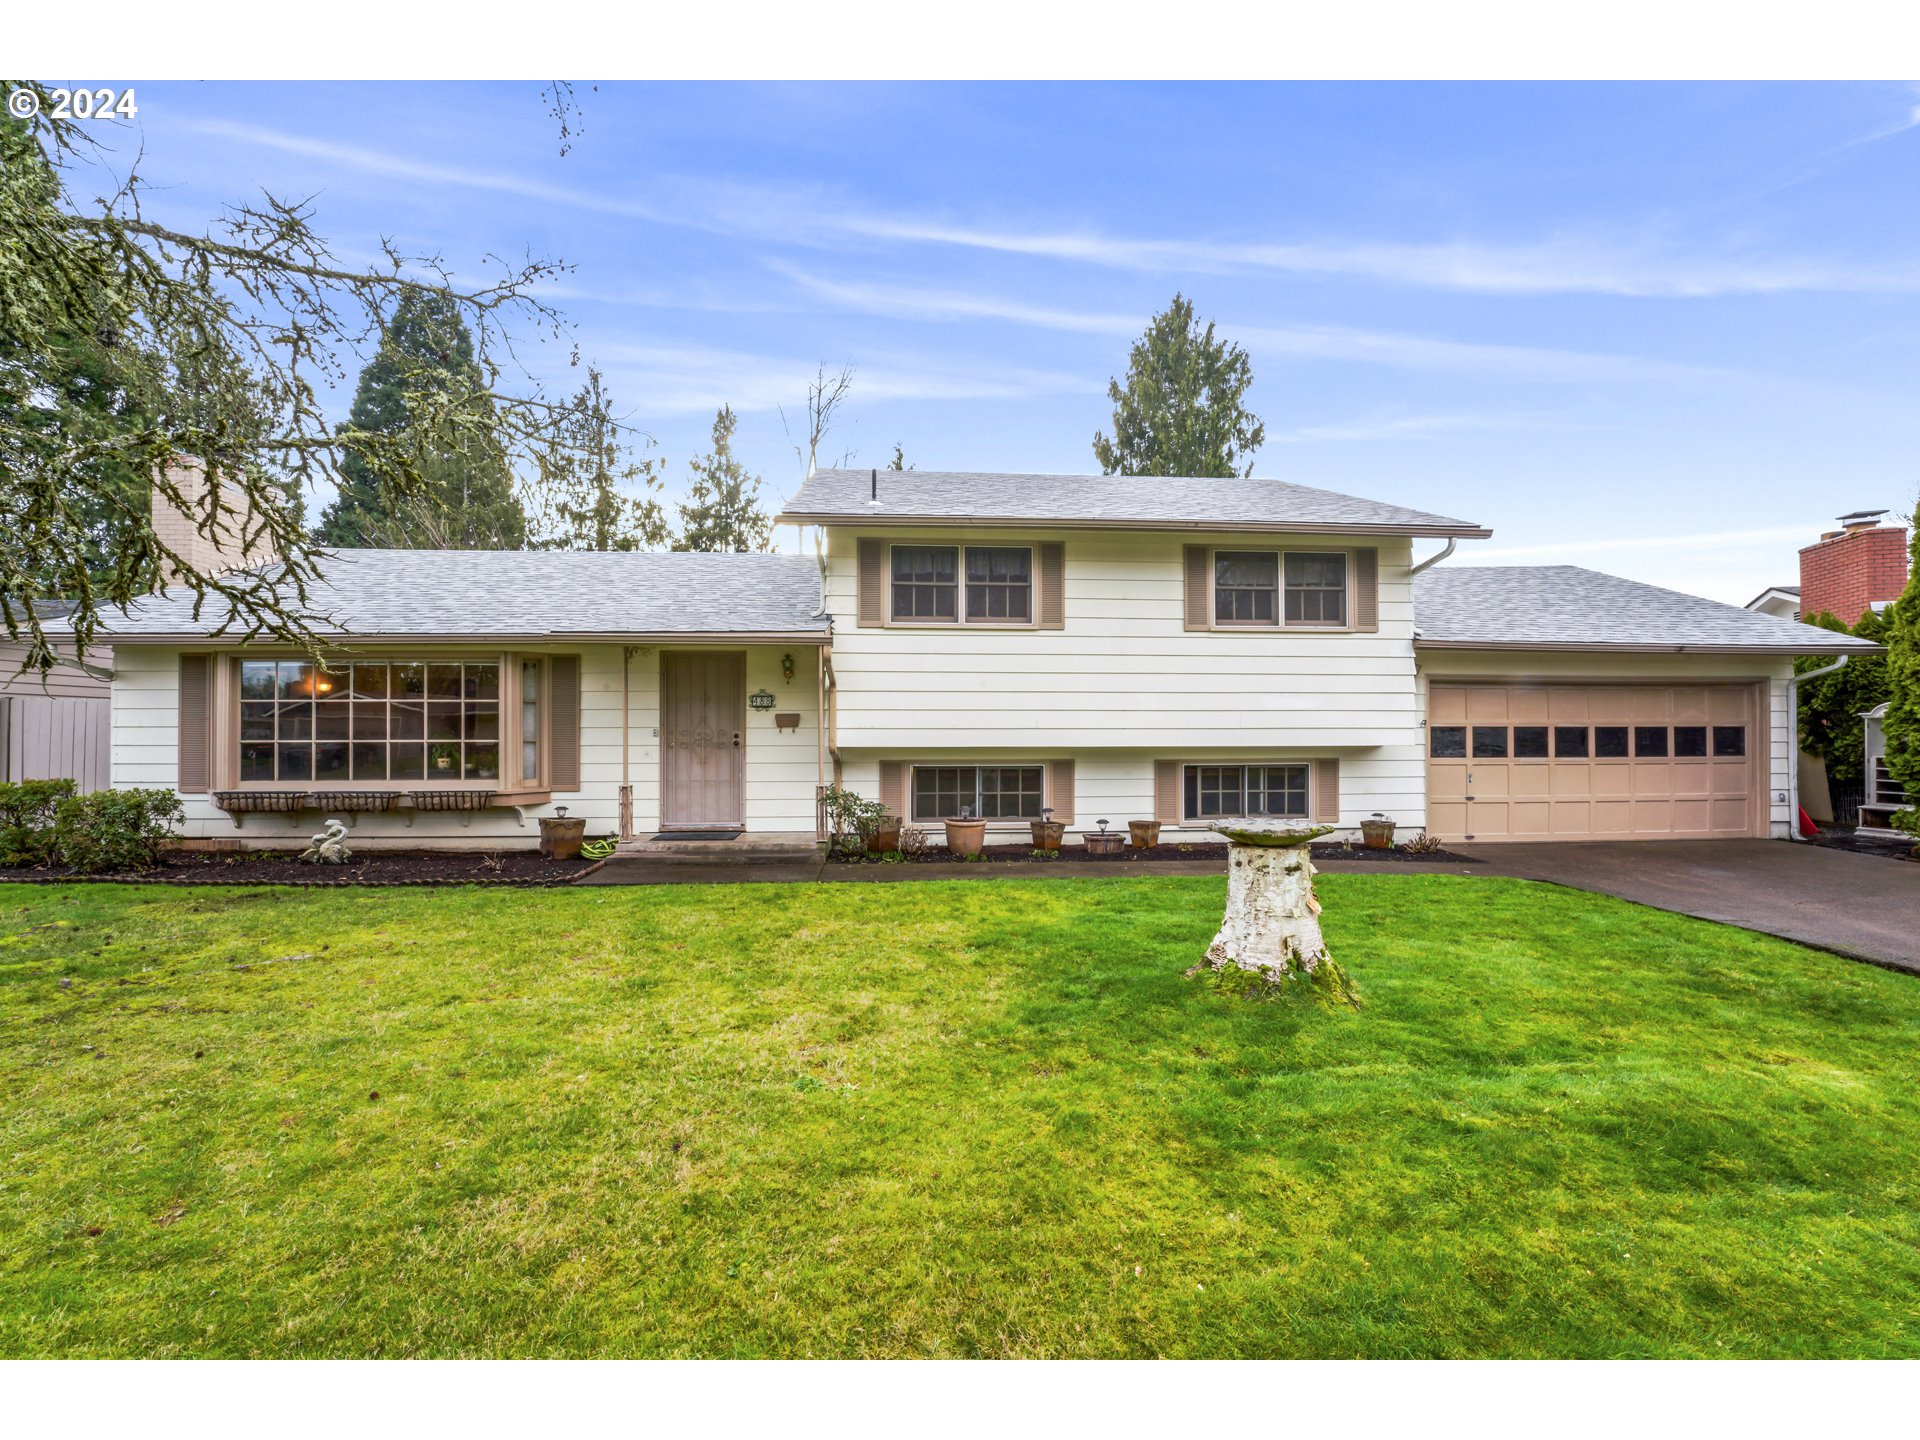 488 PINTO WAY, Eugene, OR 